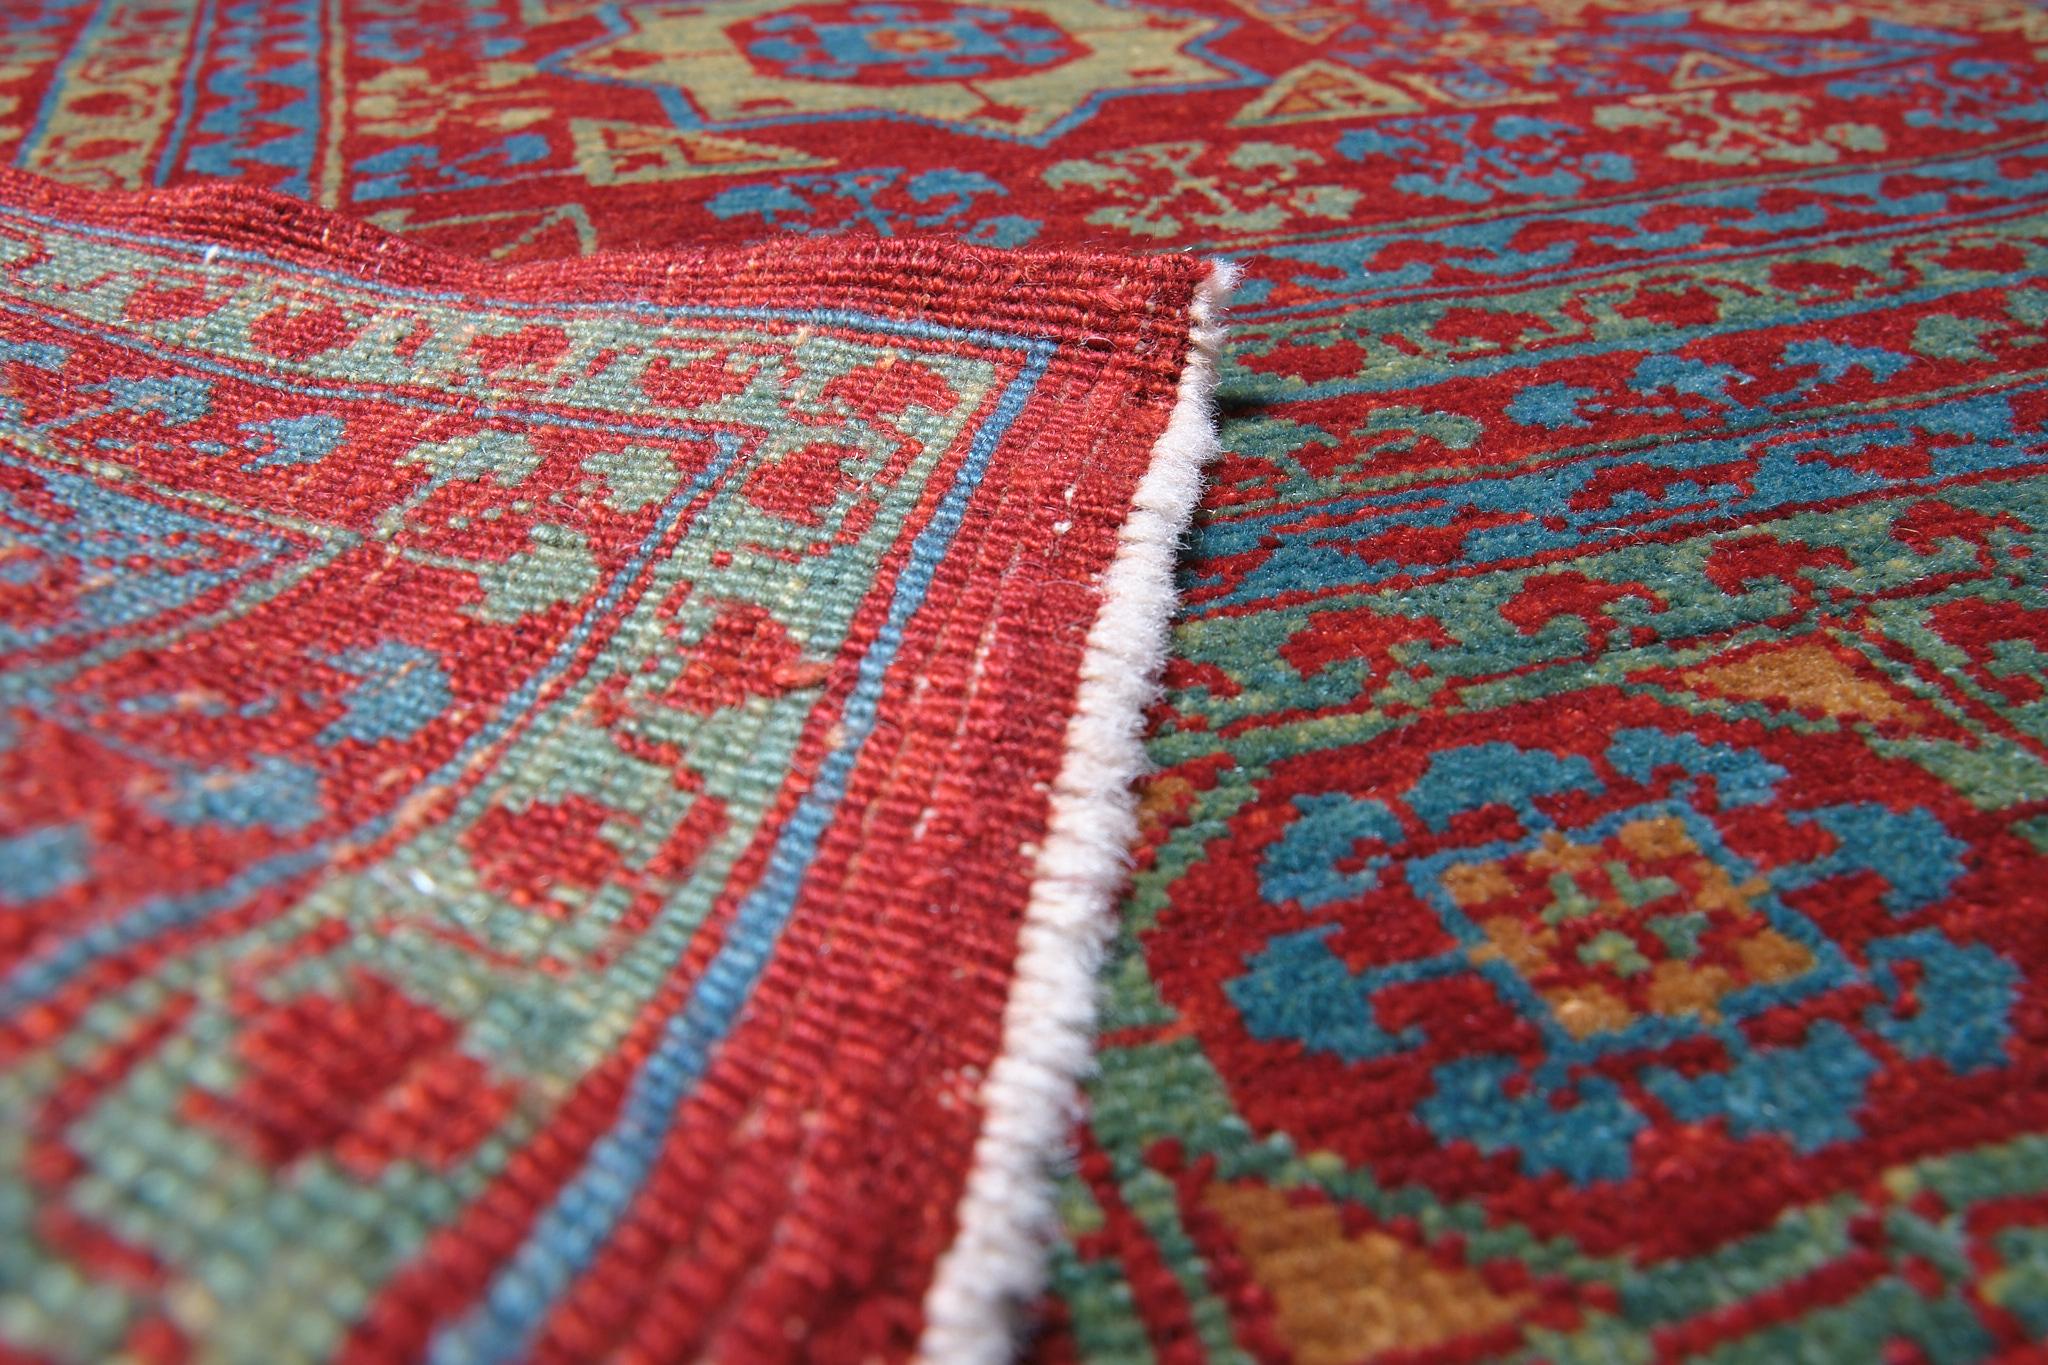 Vegetable Dyed Ararat Rugs Mamluk Rug with Central Star, 16th C. Revival Carpet, Natural Dyed For Sale